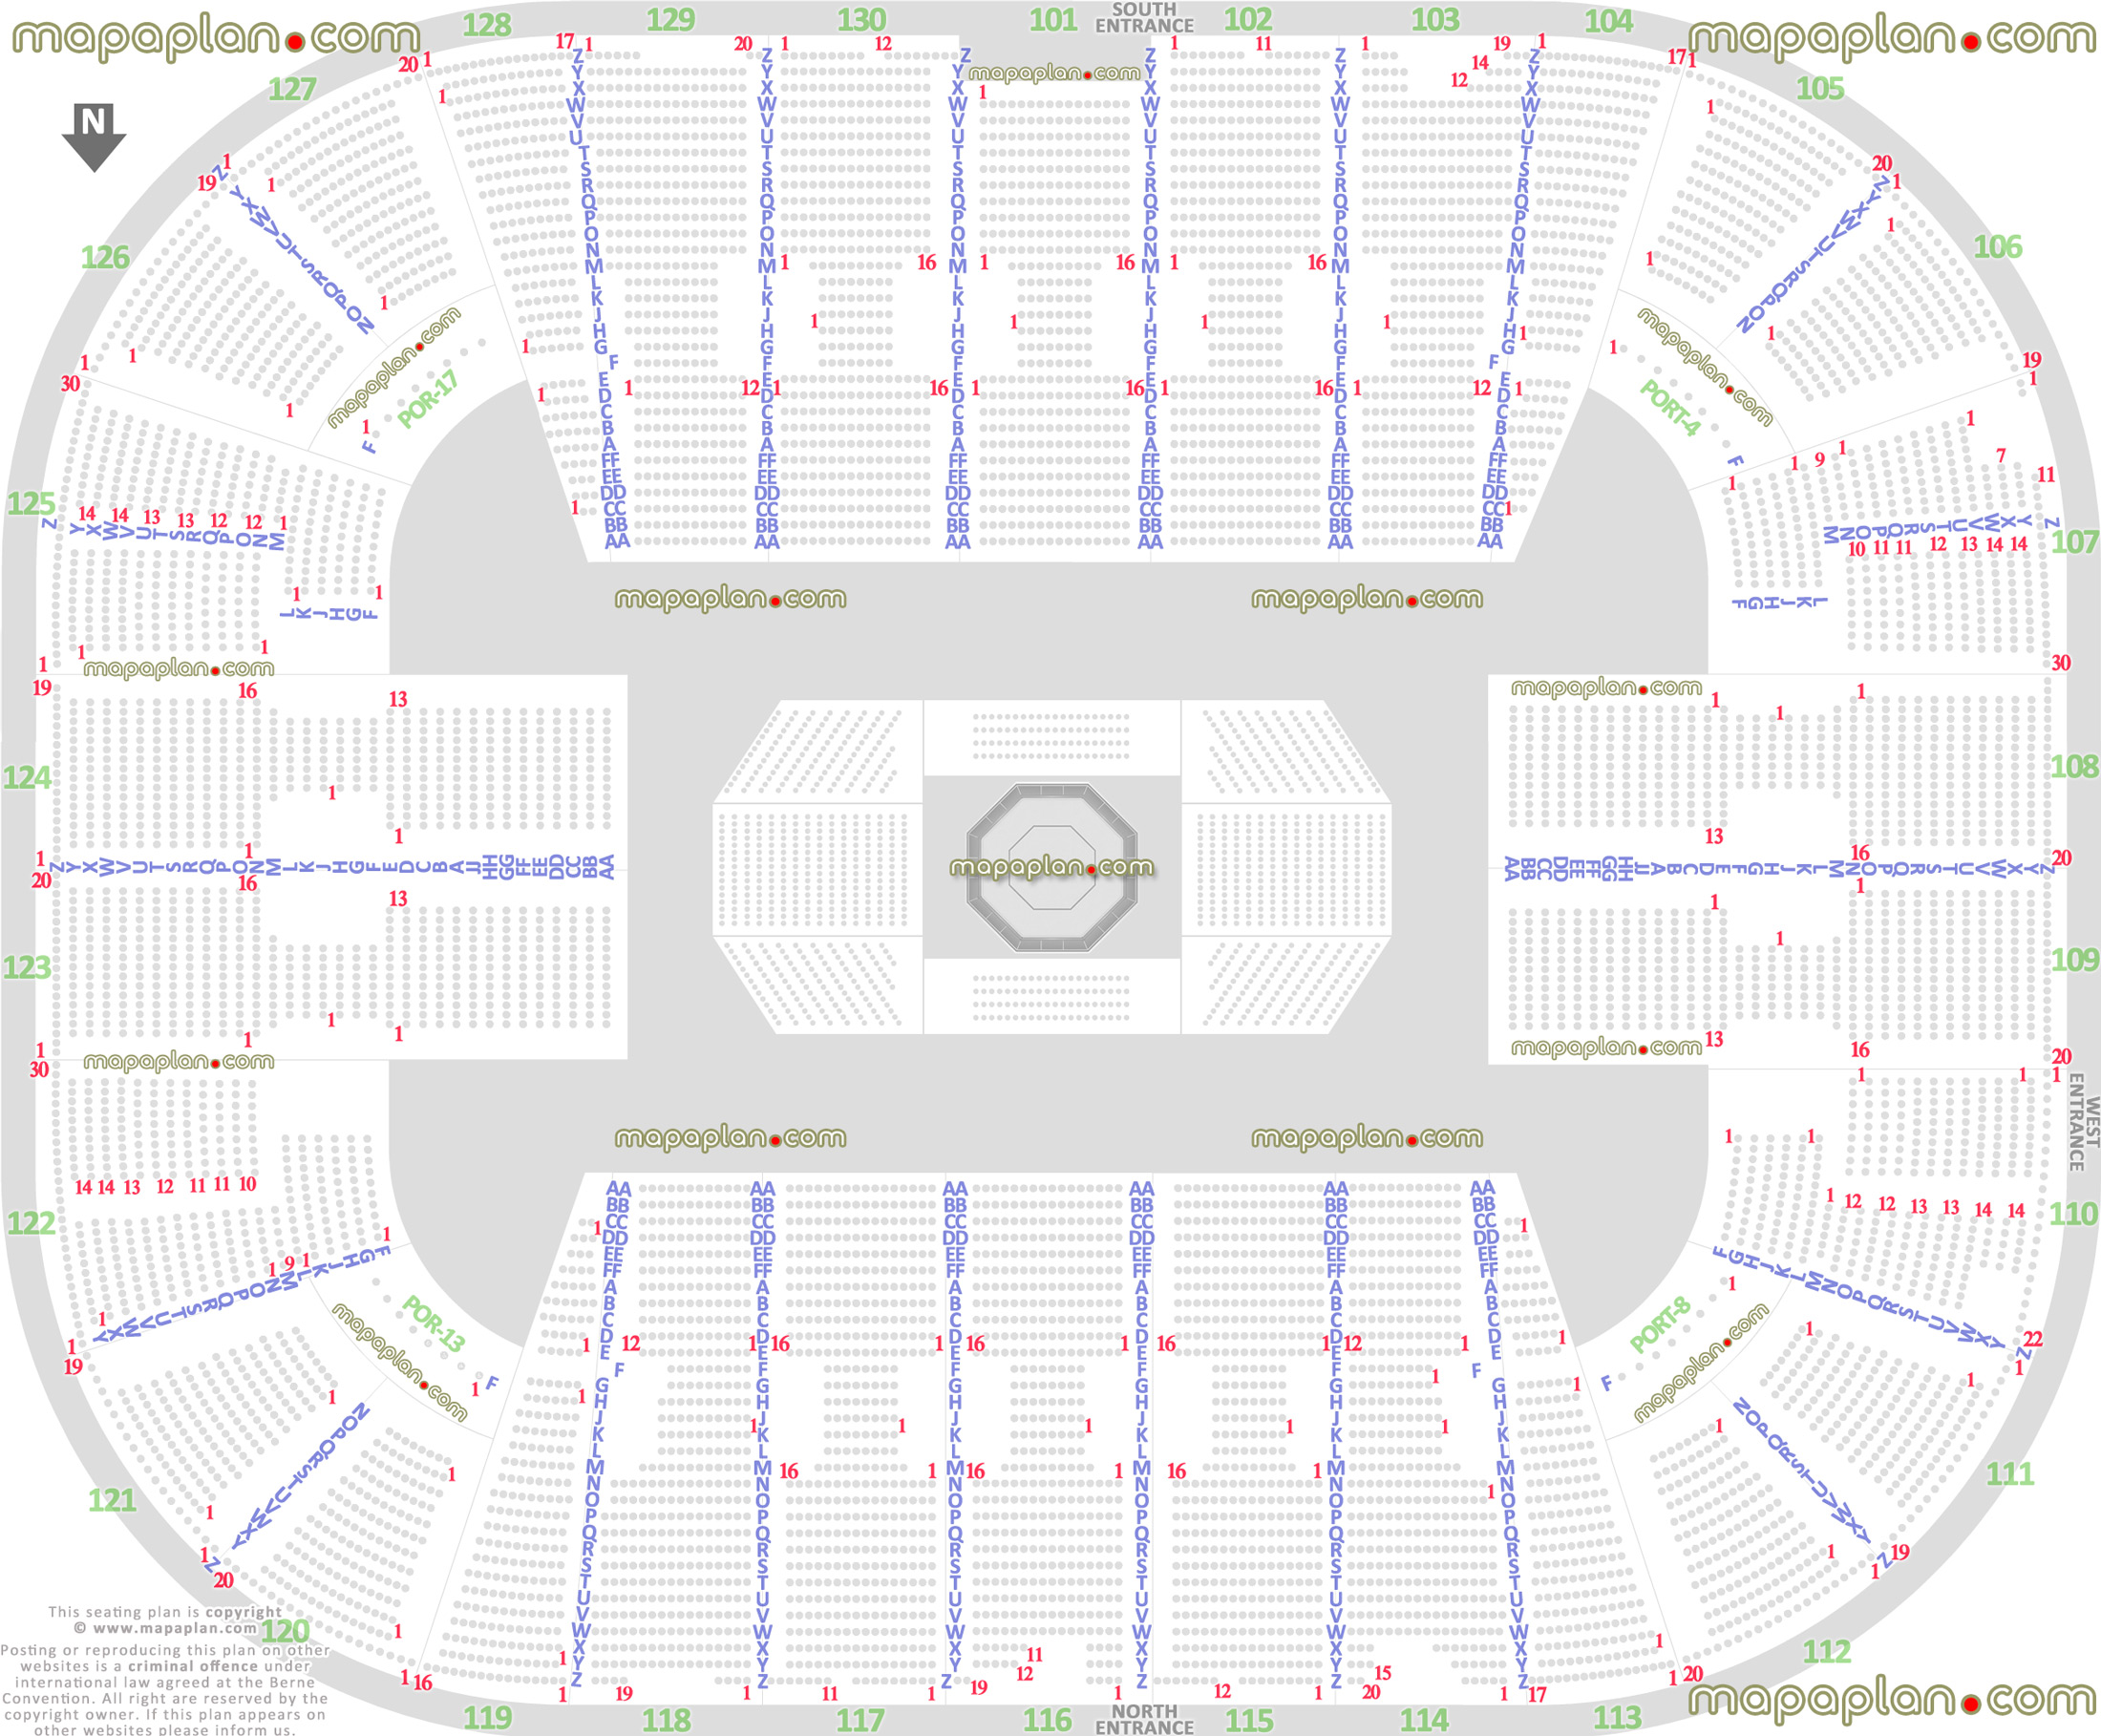 ufc mma fights fairfax va united states detailed seating capacity arrangement arena row numbers layout virtual interactive image map how many seats per row Fairfax EagleBank Arena seating chart